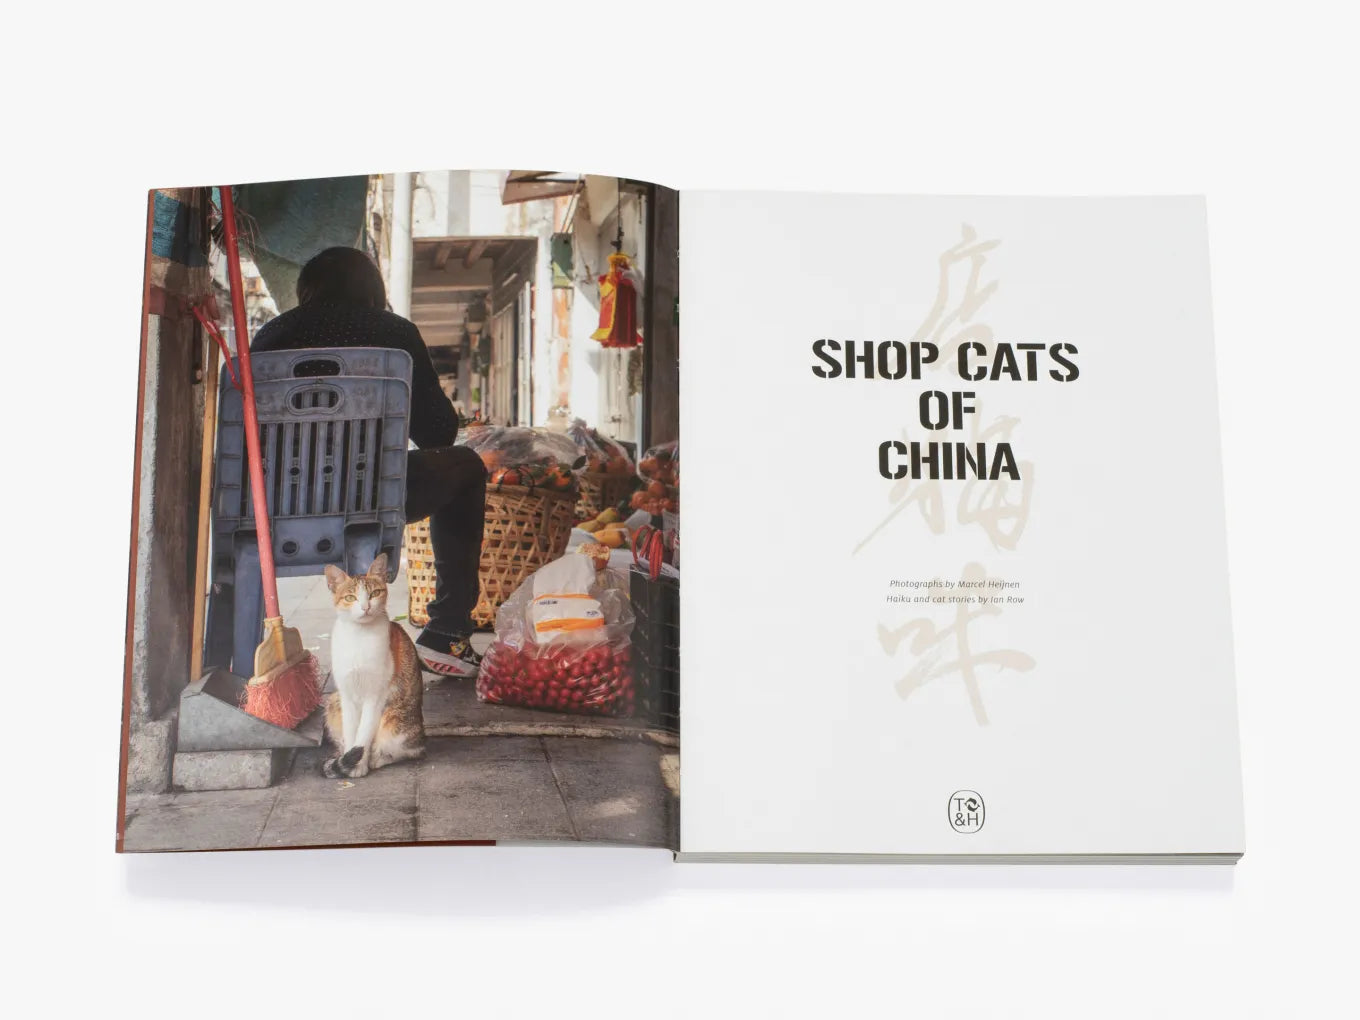 Shop Cats of China by Marcel Heijnen